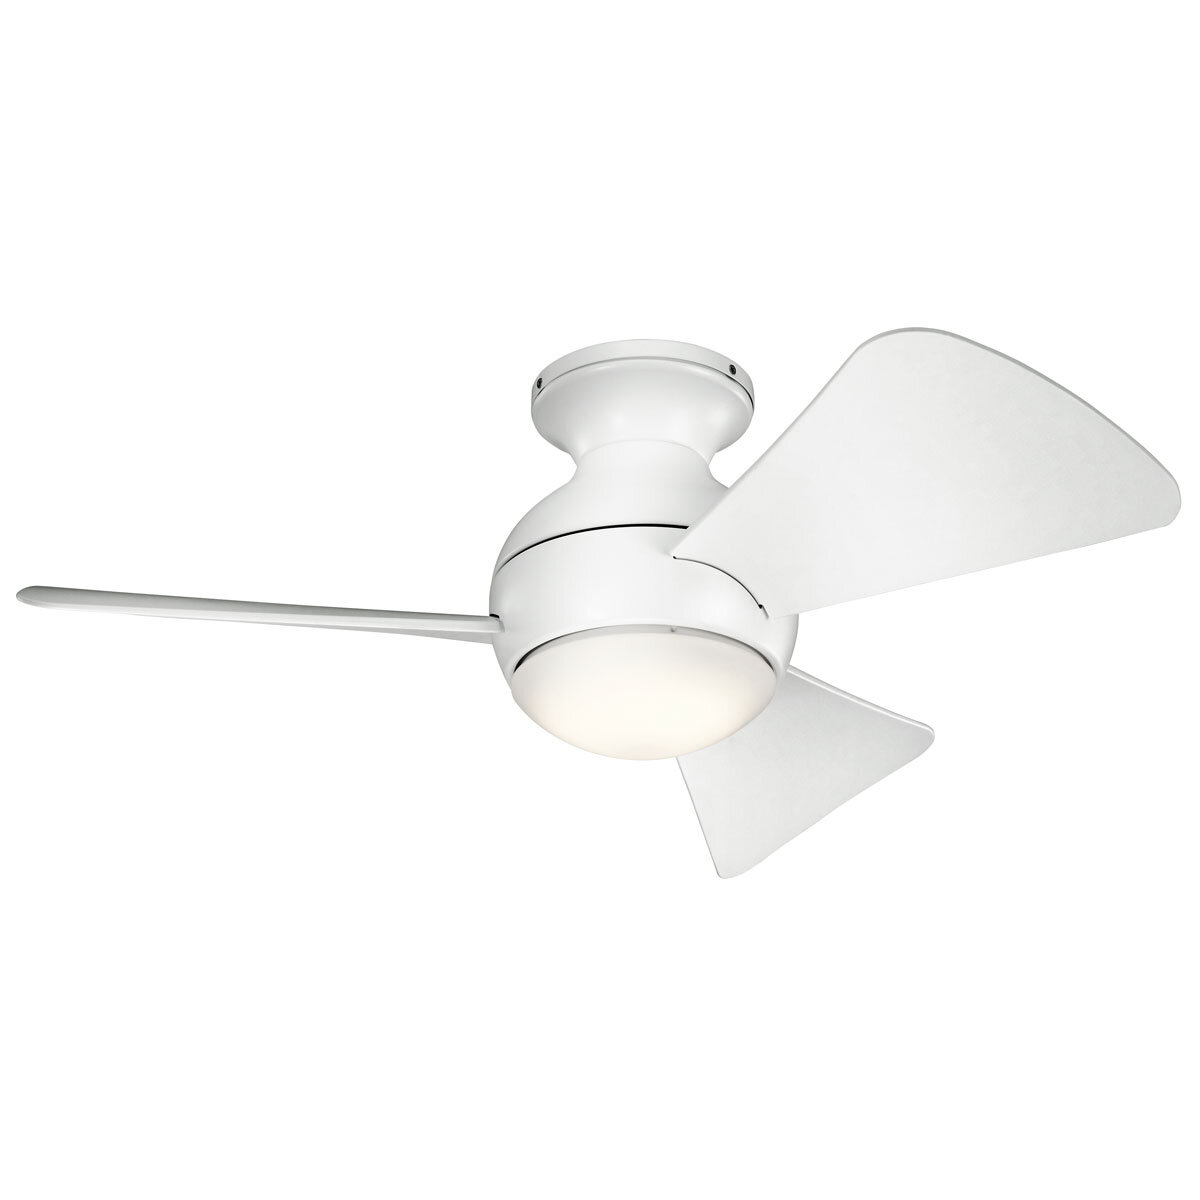 Sola 86cm small white ceiling fan IP23 rated for use in covered outdoor spaces